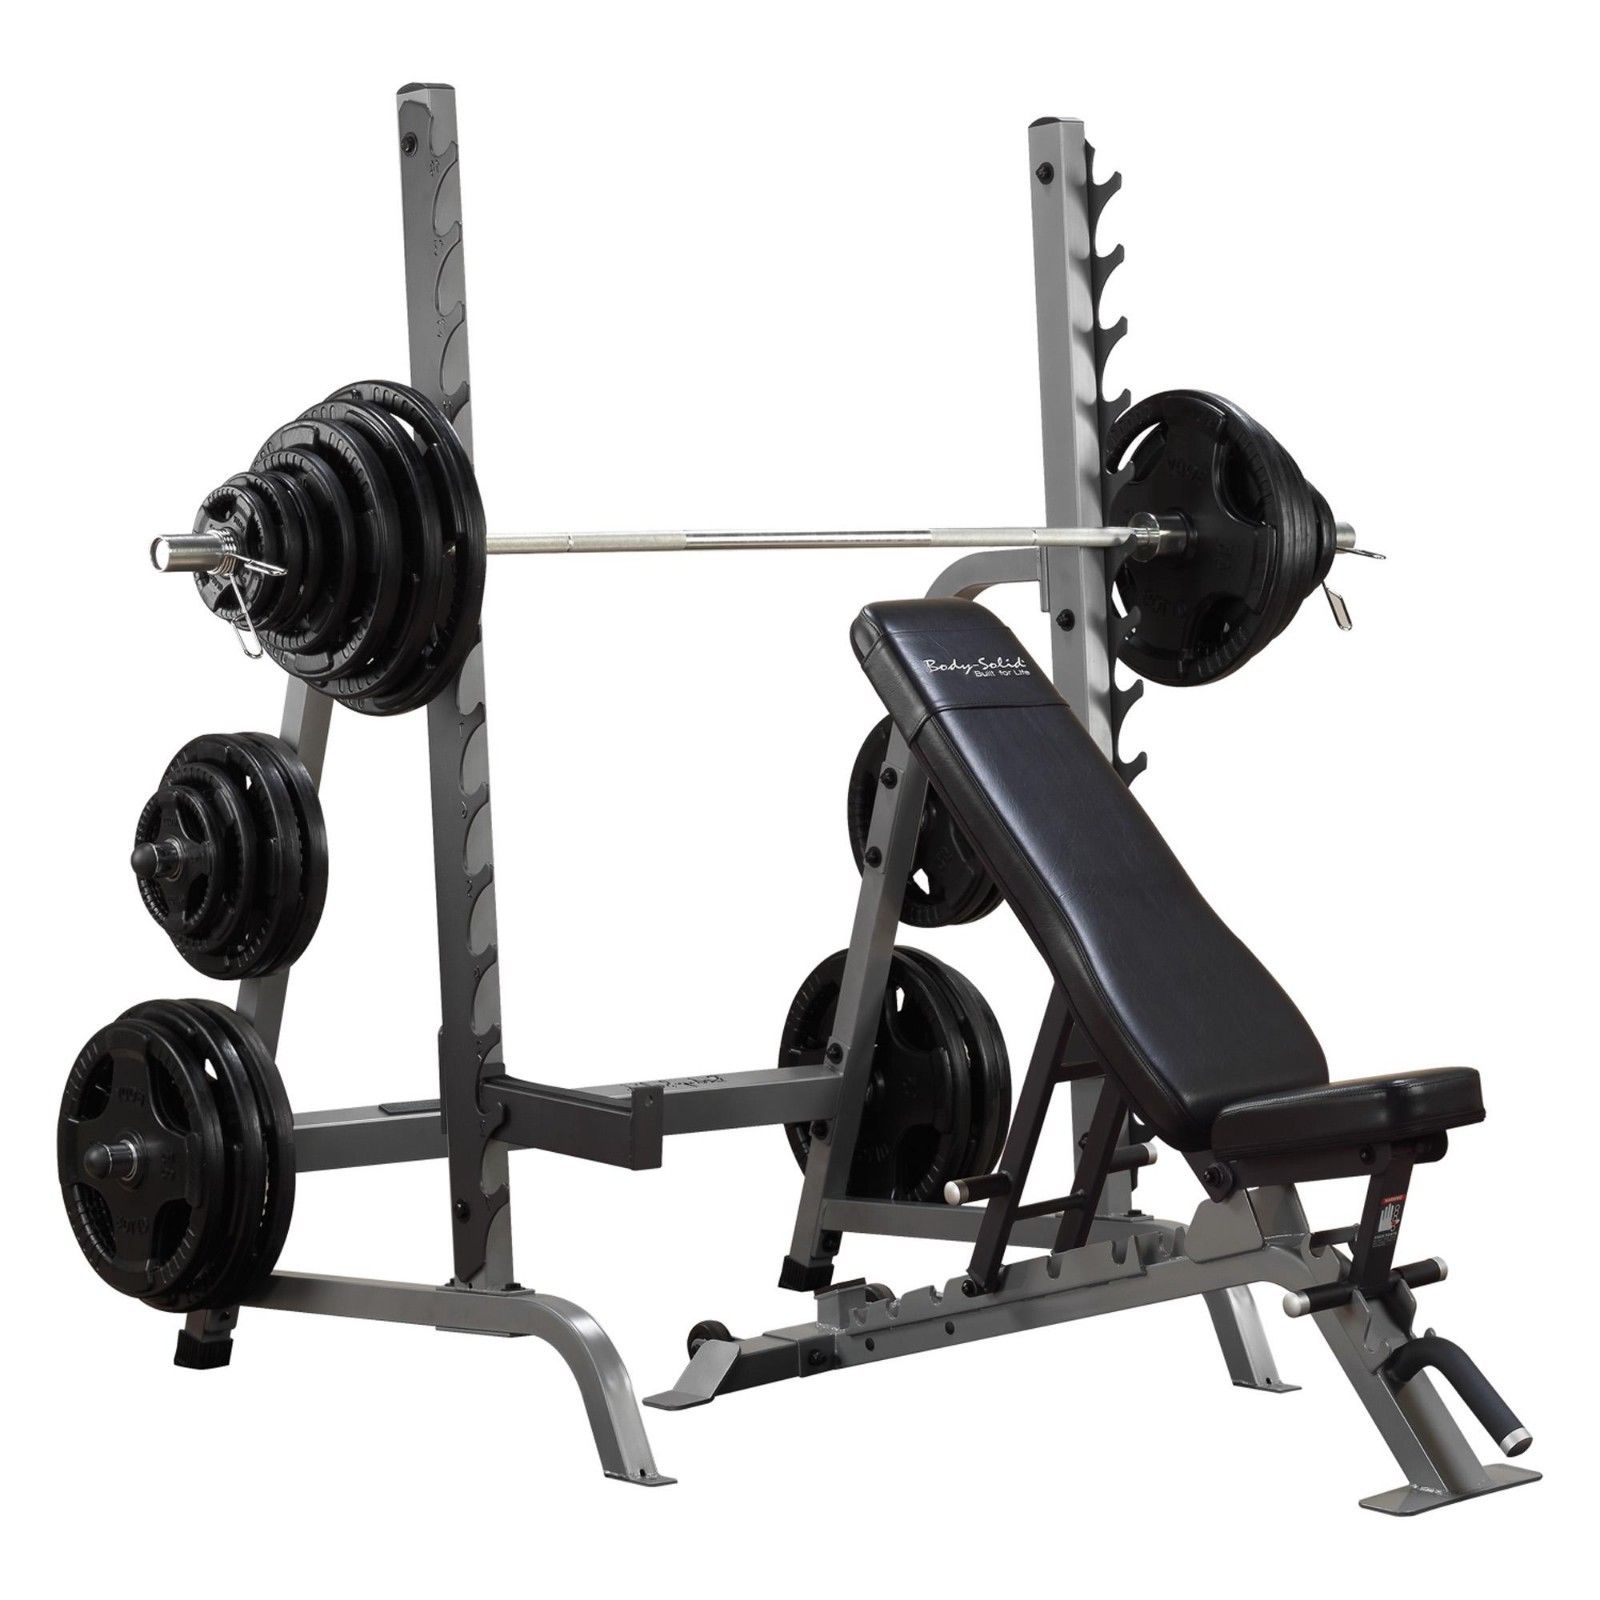 Squat Rack and Bench Press Combo Barbell Rack,Half Frame Squat Rack Multifunctional Professional Bench Press Combination Fitness Equipment